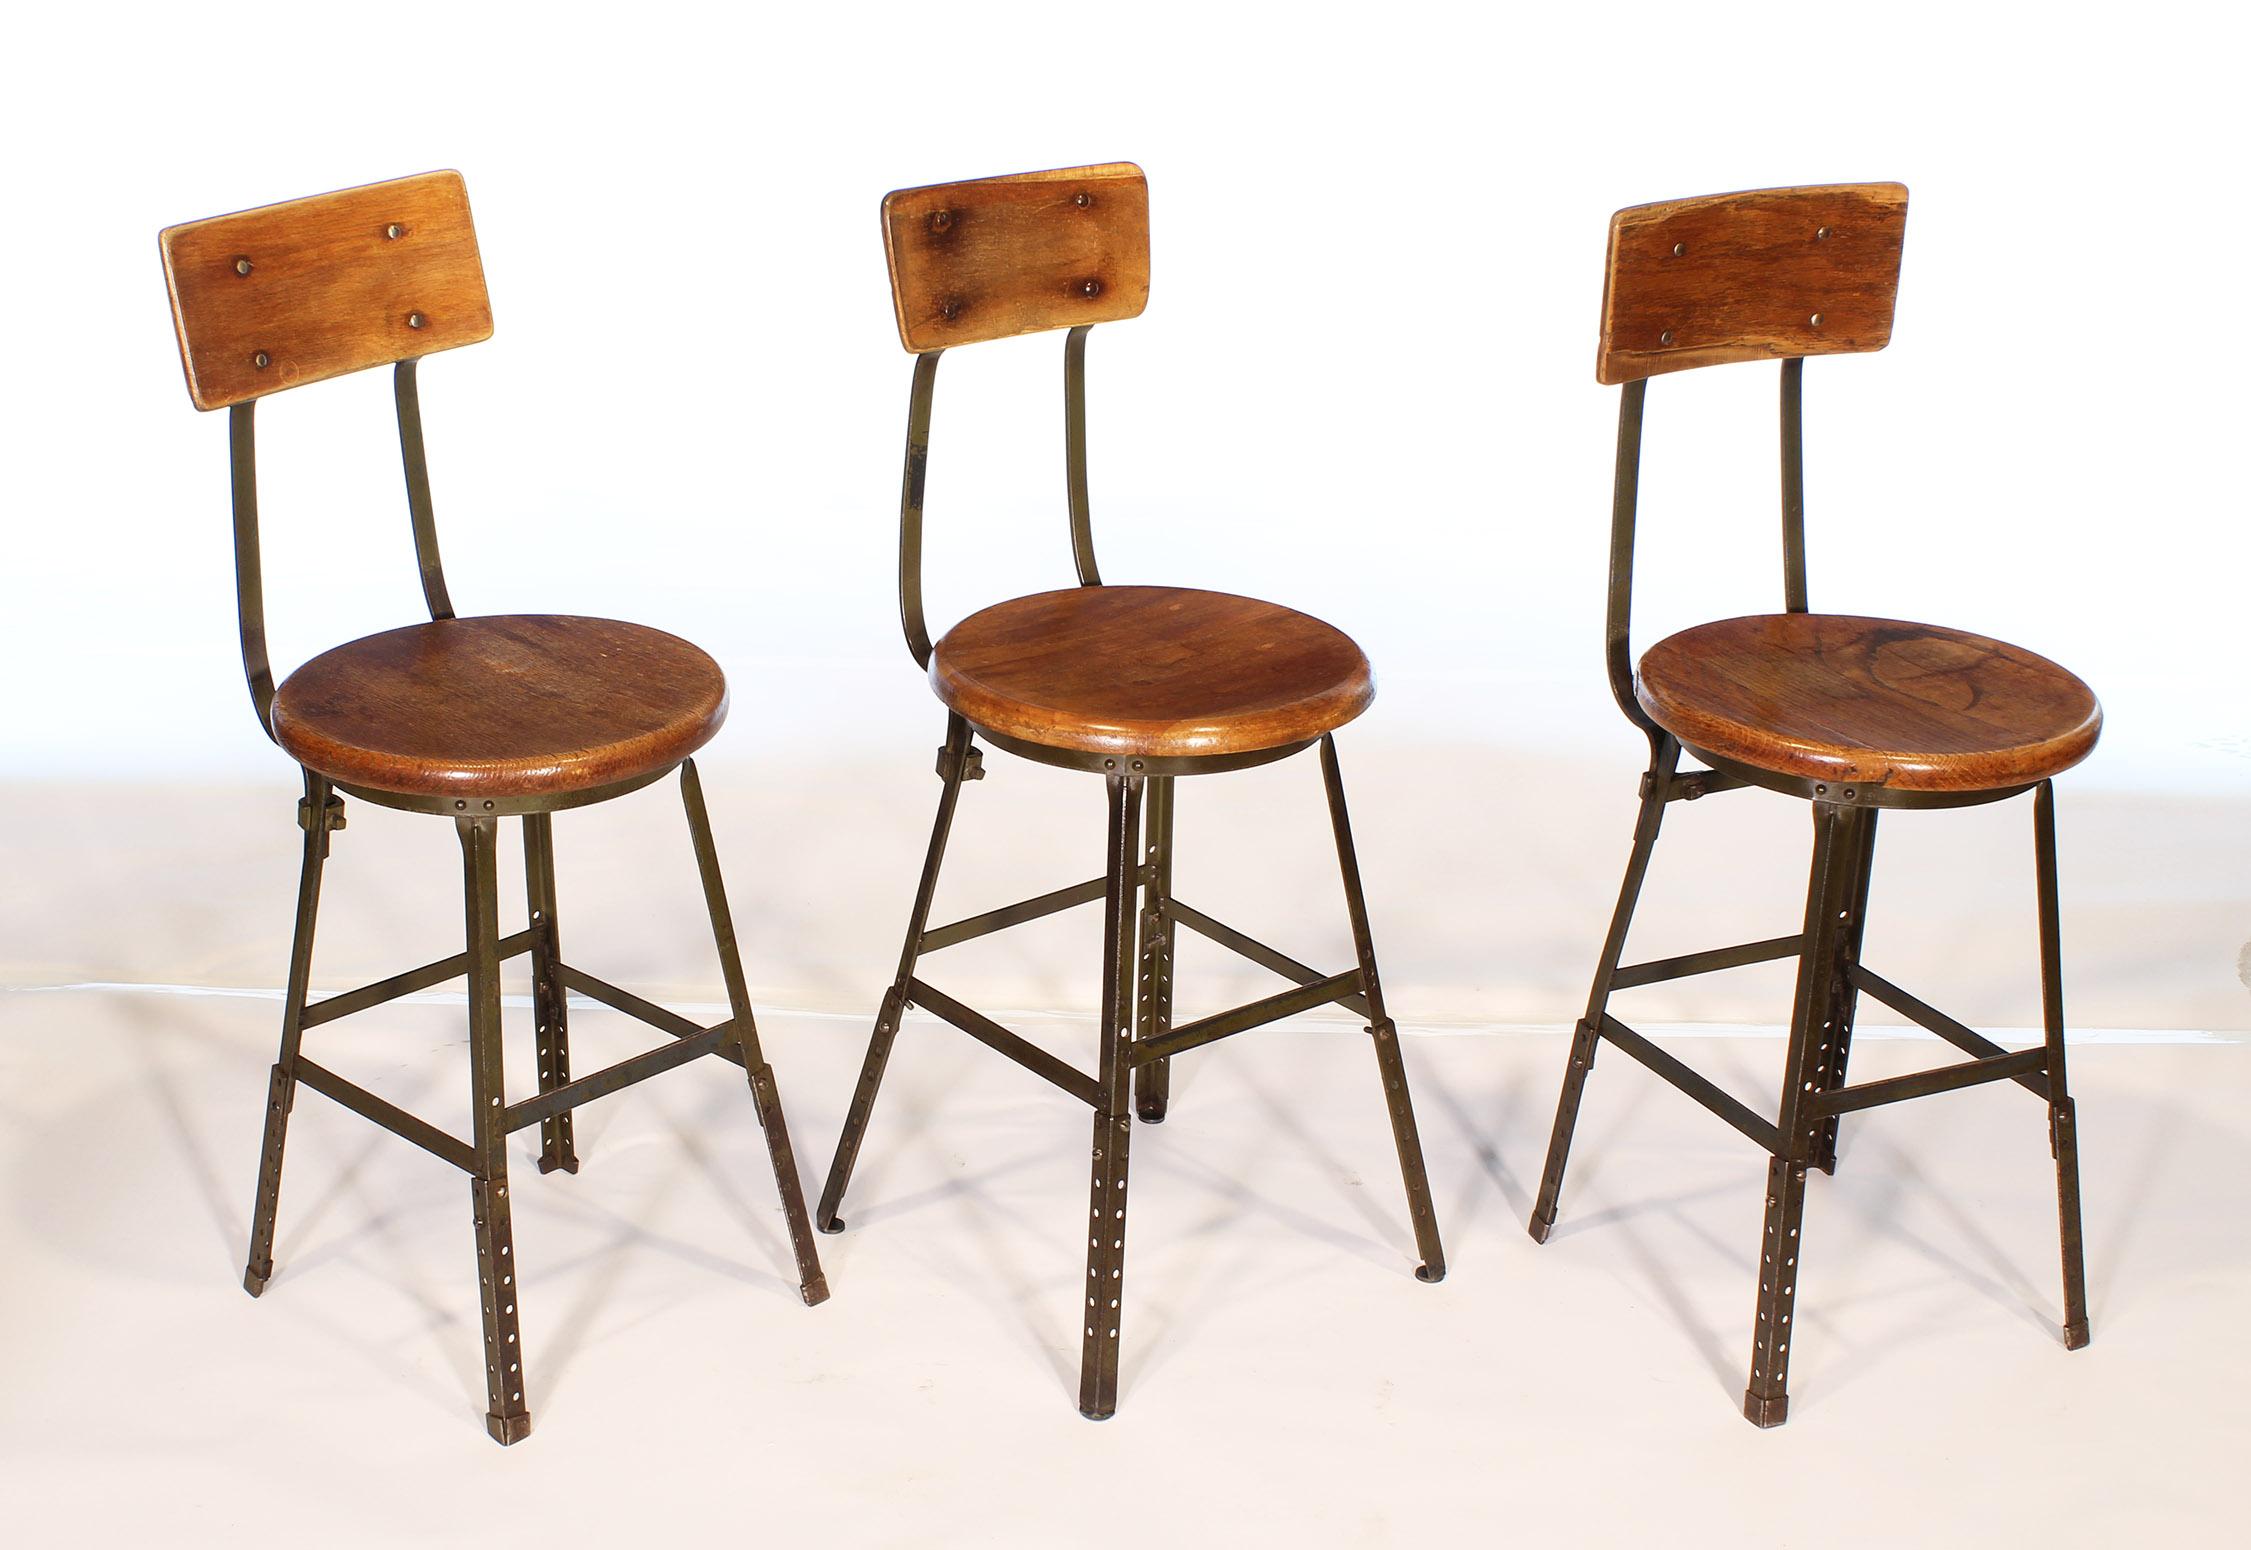 Three authentic vintage factory industrial stools. Made from wood and steel. Distressed army green original paint. Seat diameter 15